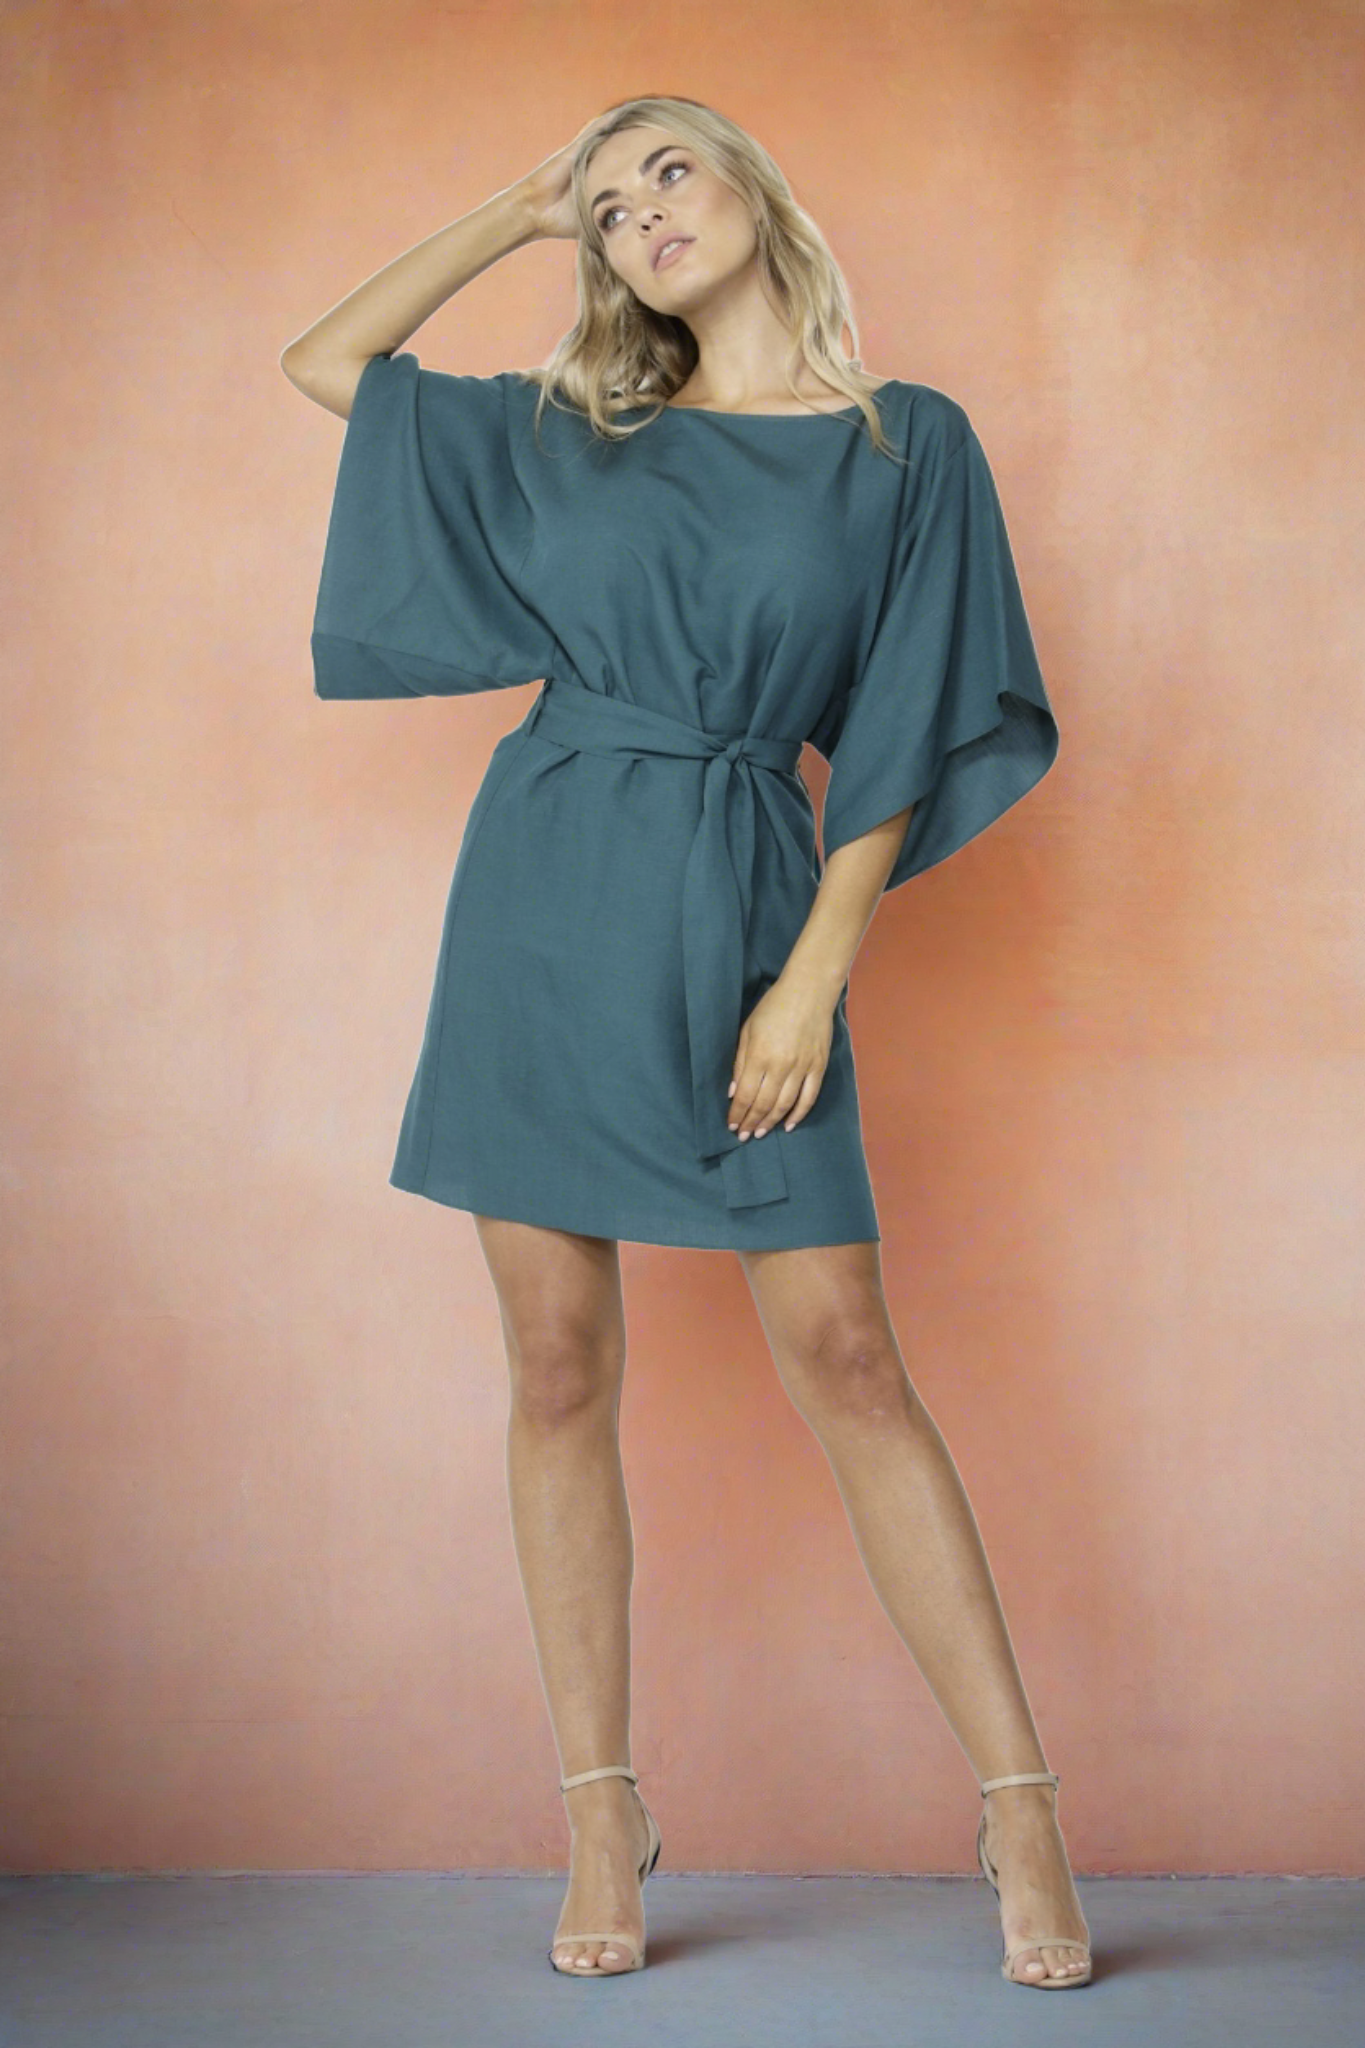 Fate + Becker Easy Distraction Dress in Jade